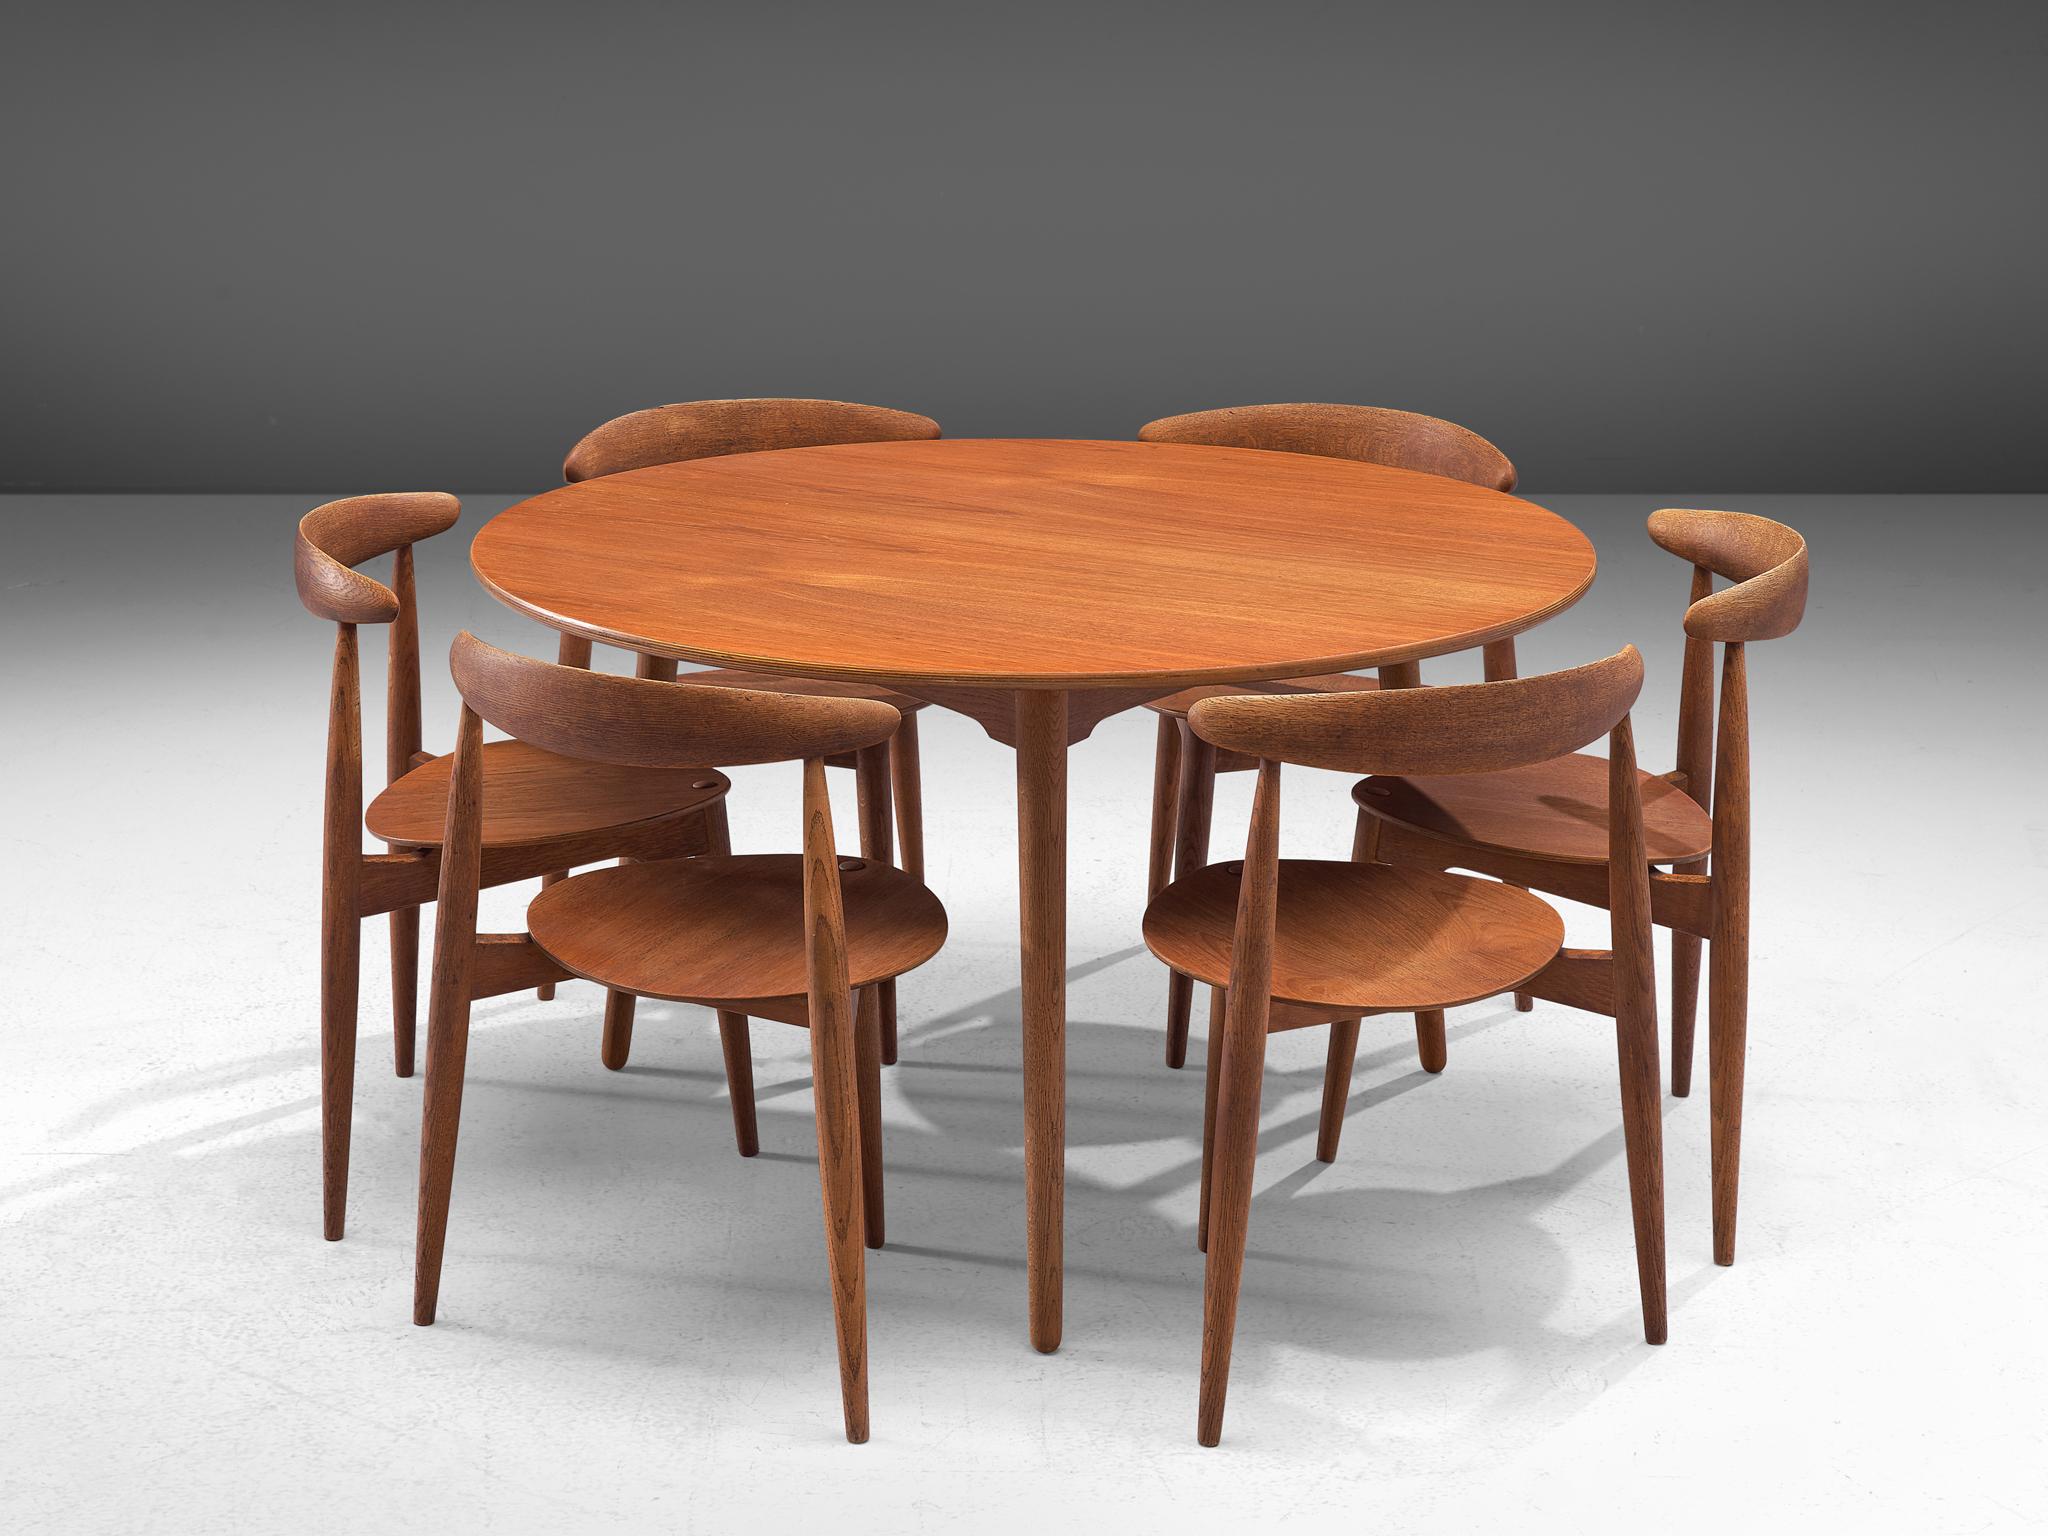 Hans J. Wegner for Fritz Hansen, set of 6 Heart chairs FH4103 and dining table, teak, Denmark, 1953.

This dining set, consisting of a round dining table and six dining chairs, is designed by Hans Wegner in 1952. The chairs are designed to take up